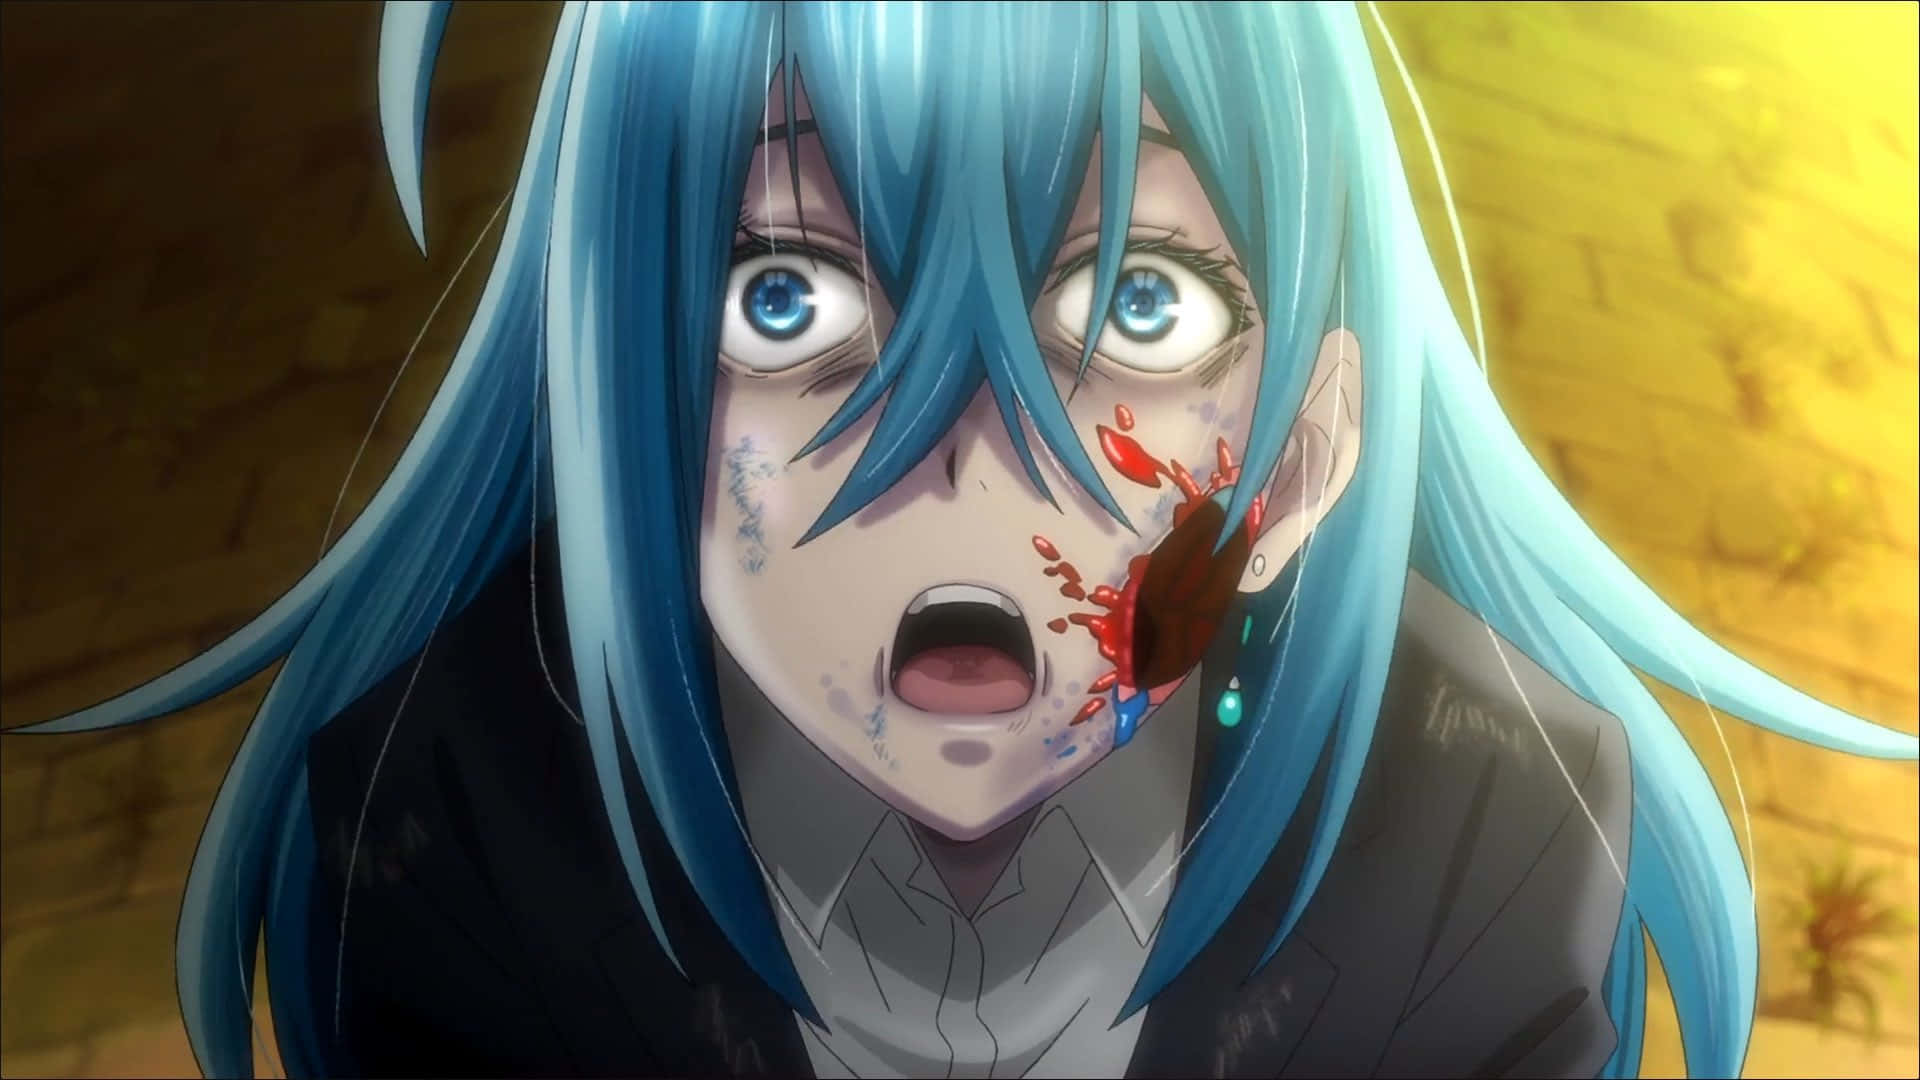 A Girl With Blue Hair And Blood On Her Face